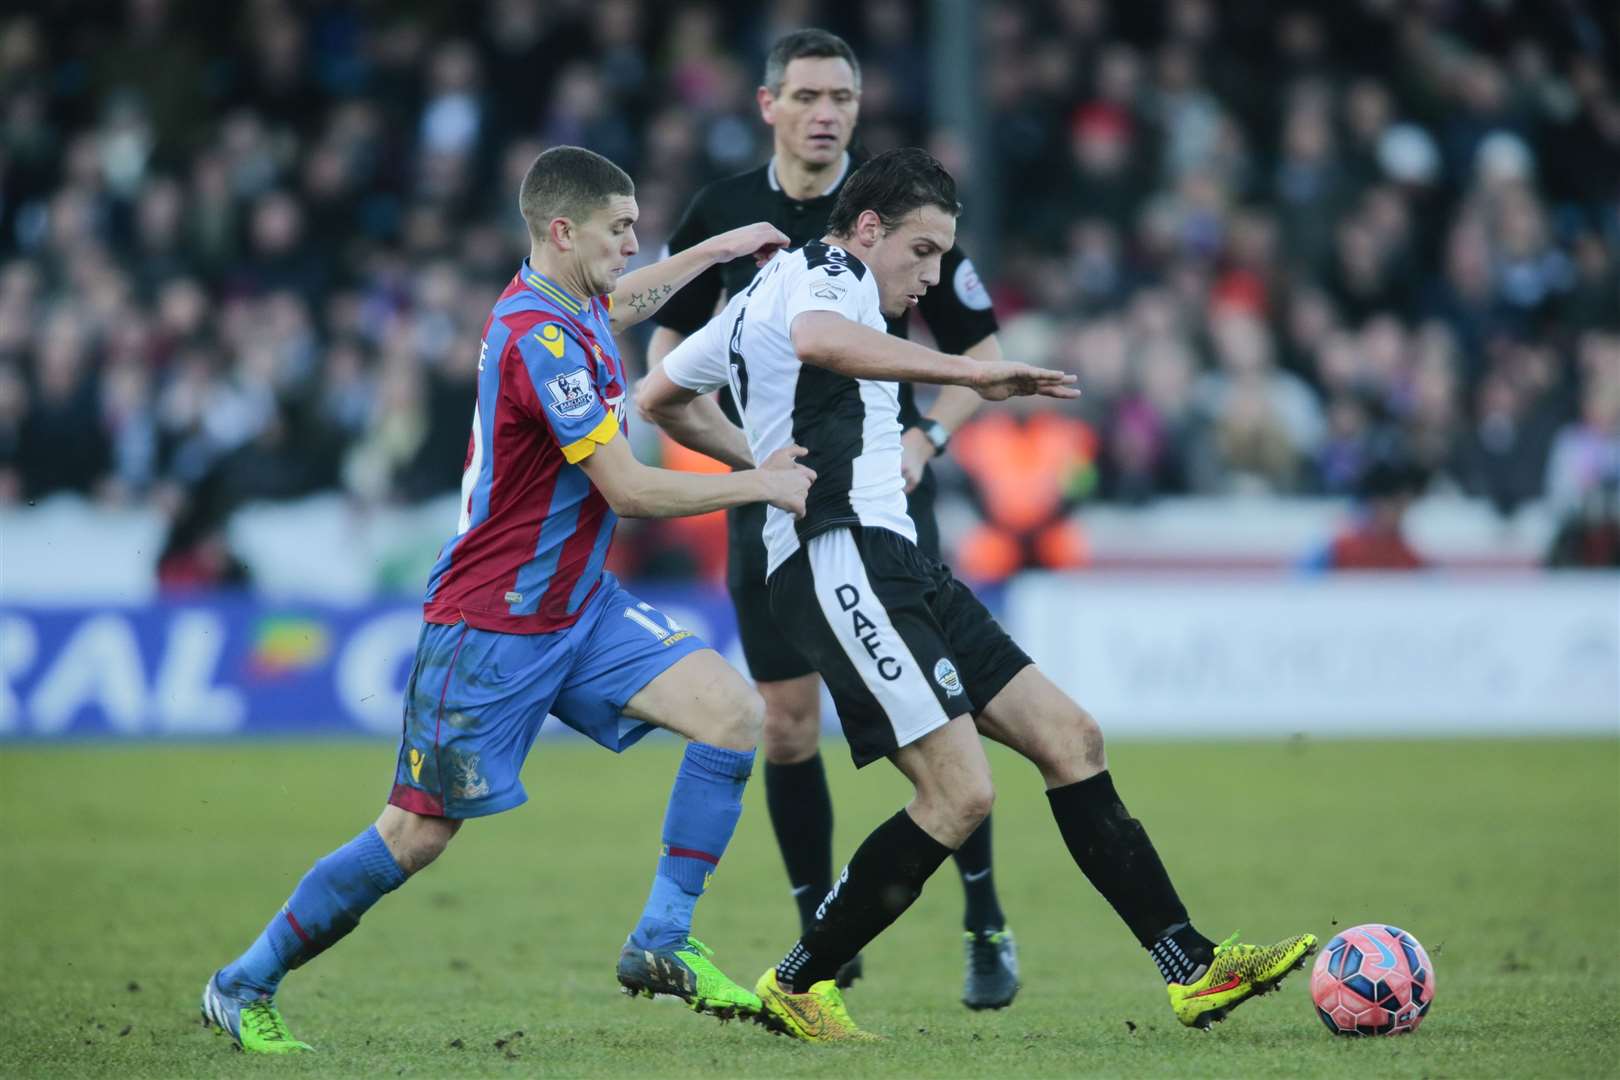 Stuart O'Keefe pressures Dover's Liam Bellamy while playing for Crystal Palace in the FA Cup Picture: Martin Apps